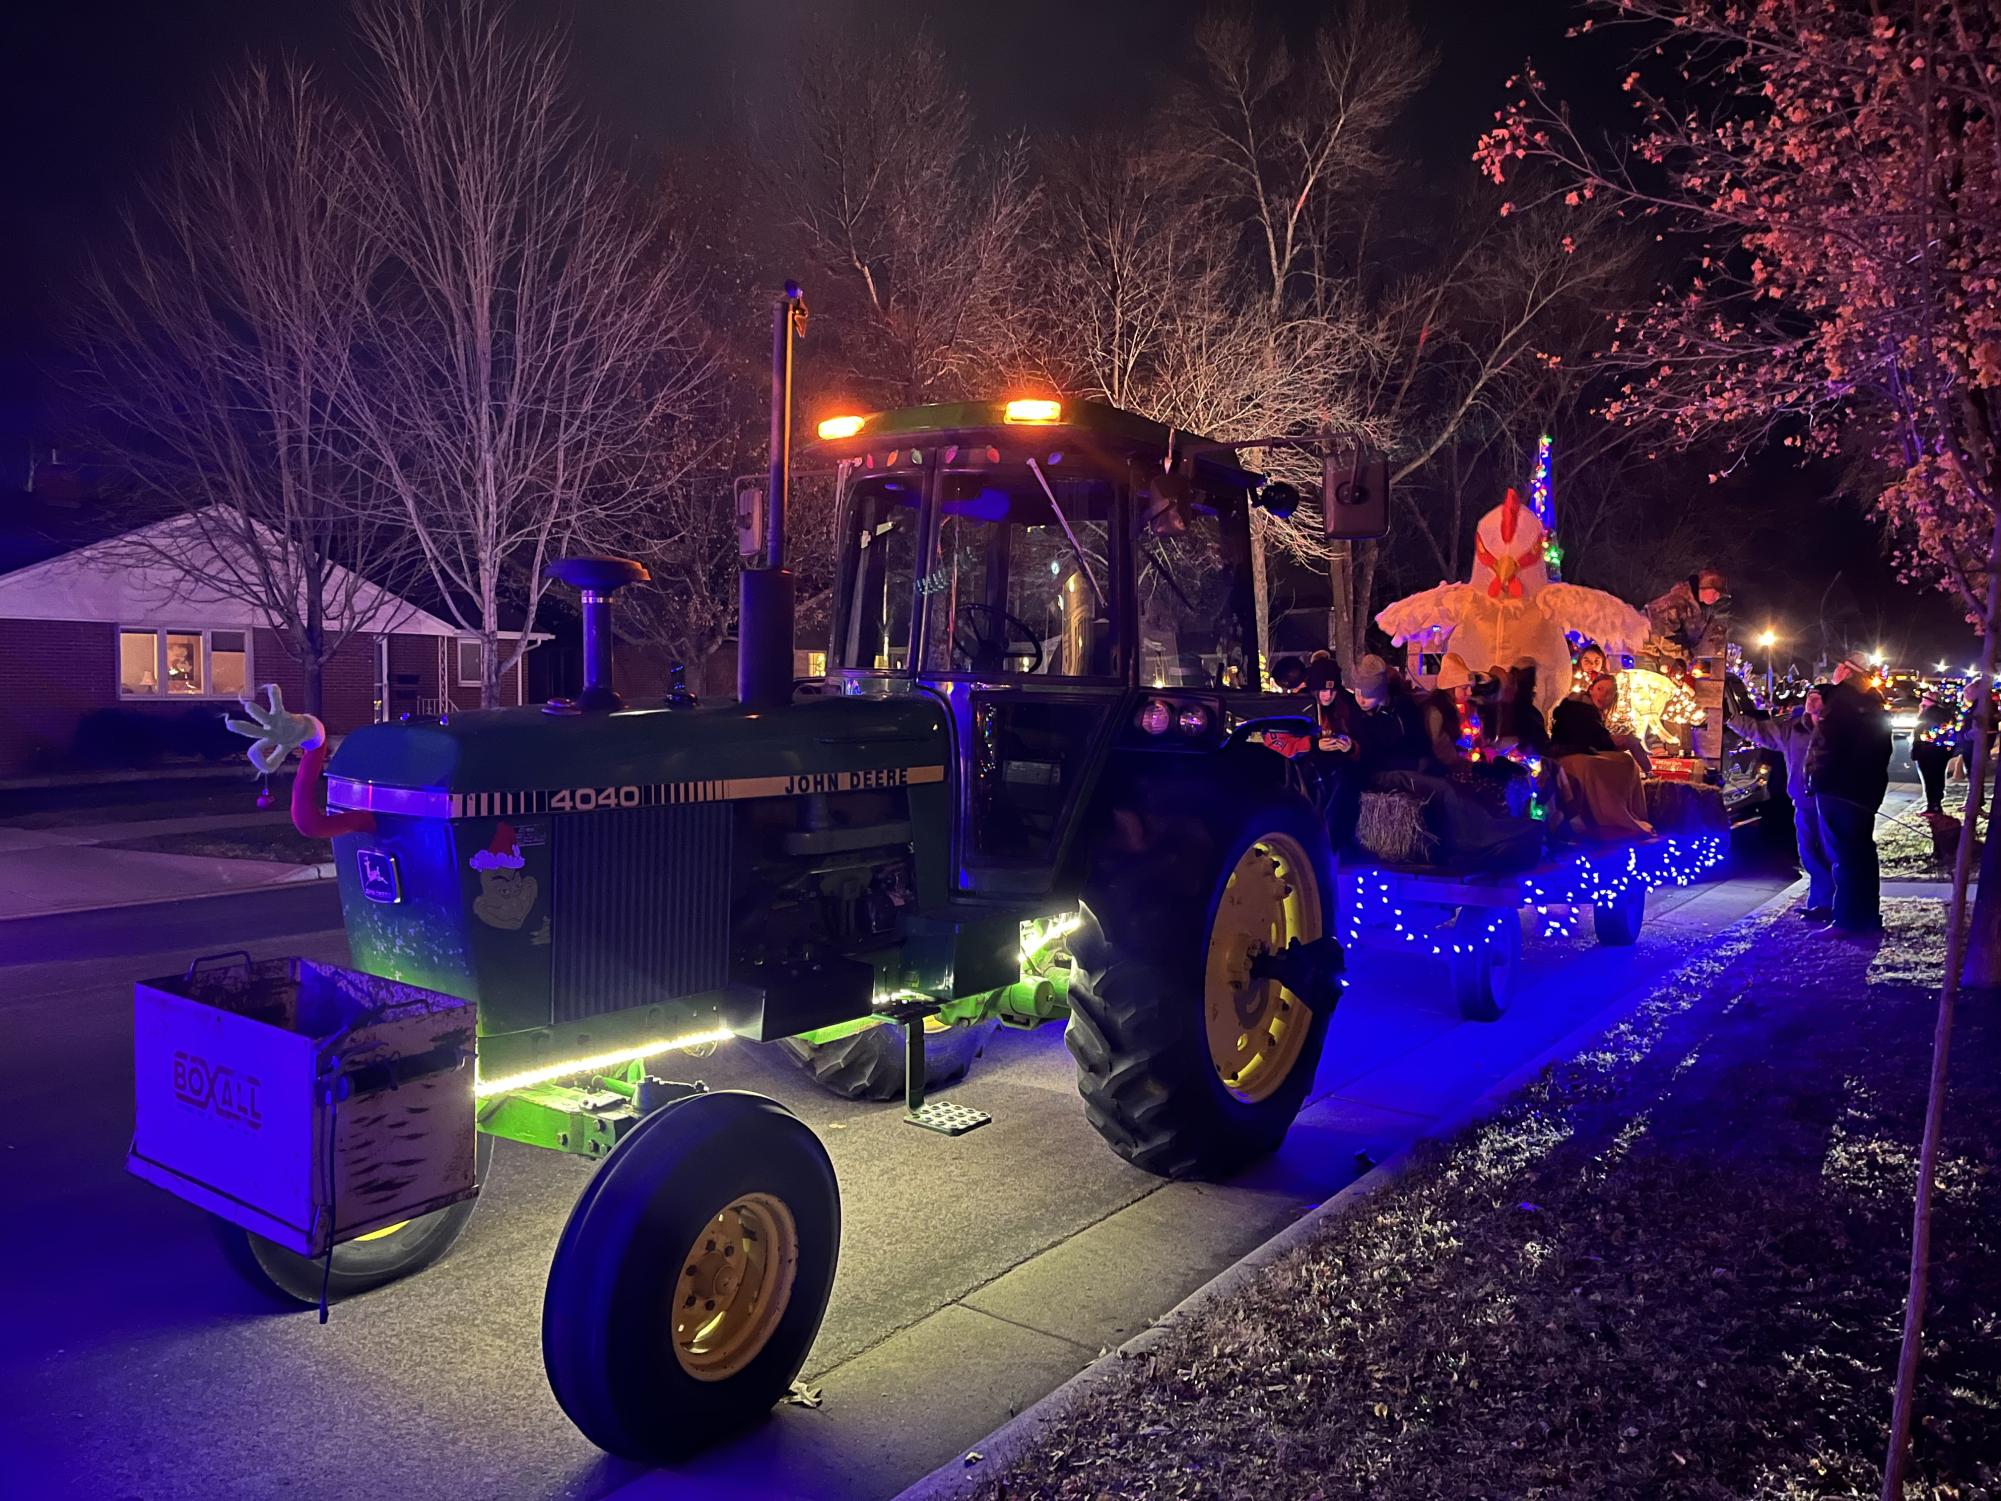 The second tractor and float in the parade driven by Kolbe Platz.